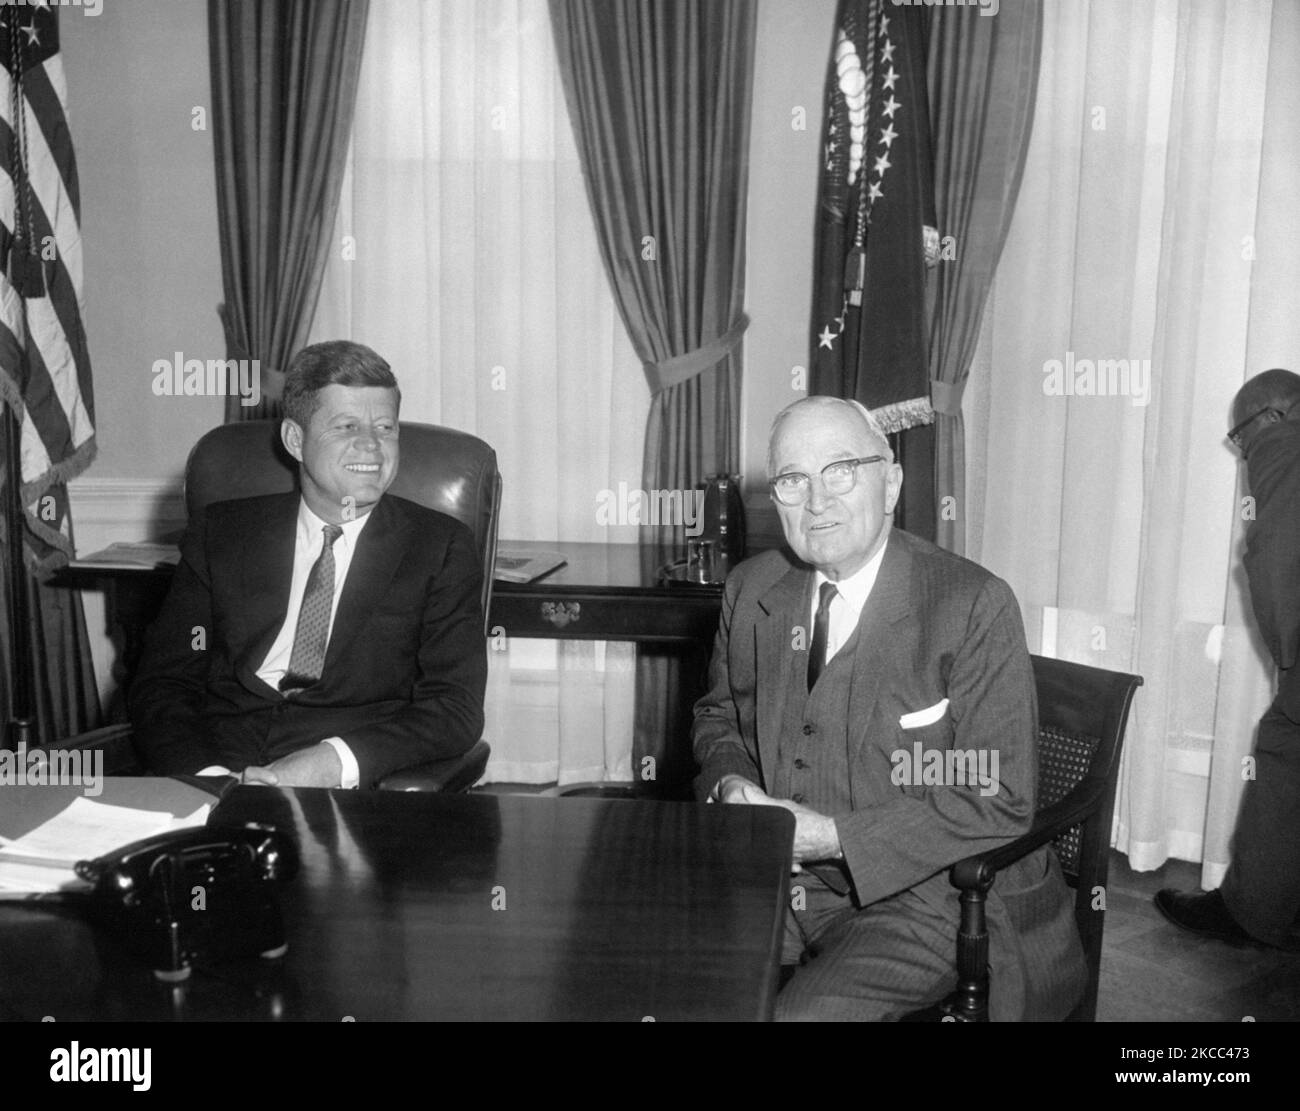 President John F. Kennedy and Harry S. Truman in the Oval Office of the White House. Stock Photo